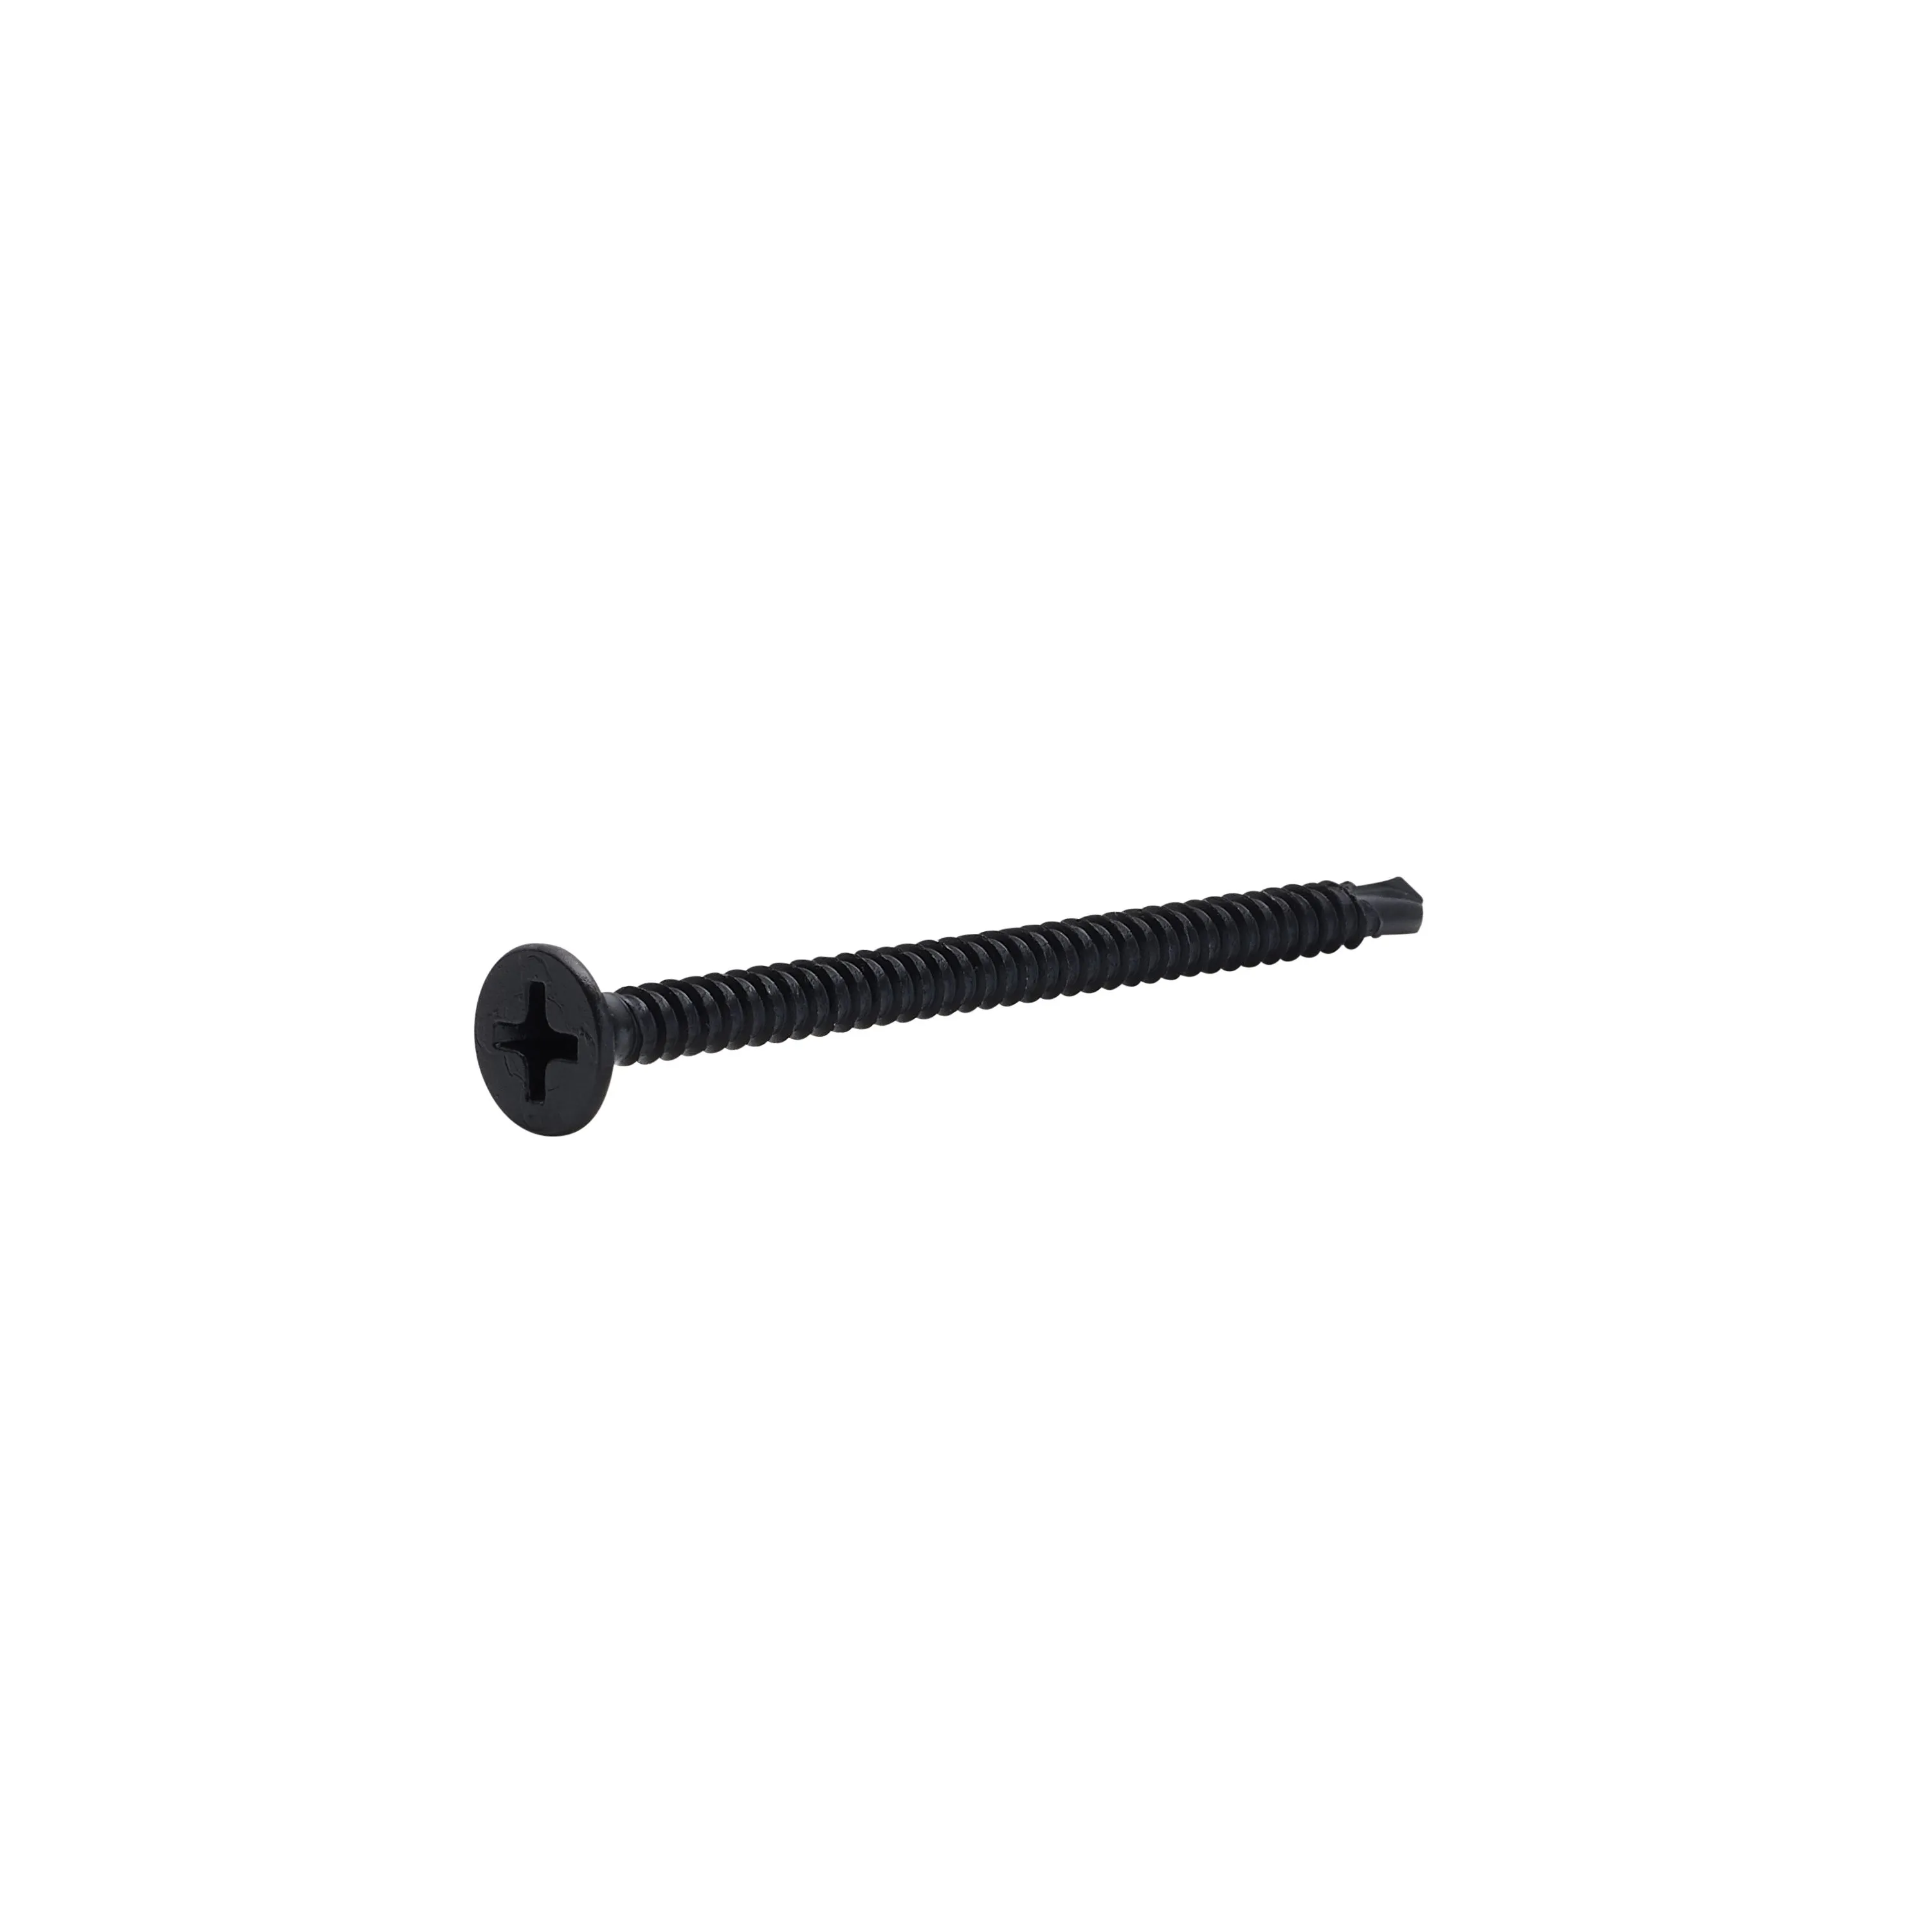 Diall Carbon steel Fine Plasterboard screw (Dia)3.5mm (L)55mm, Pack of 1000